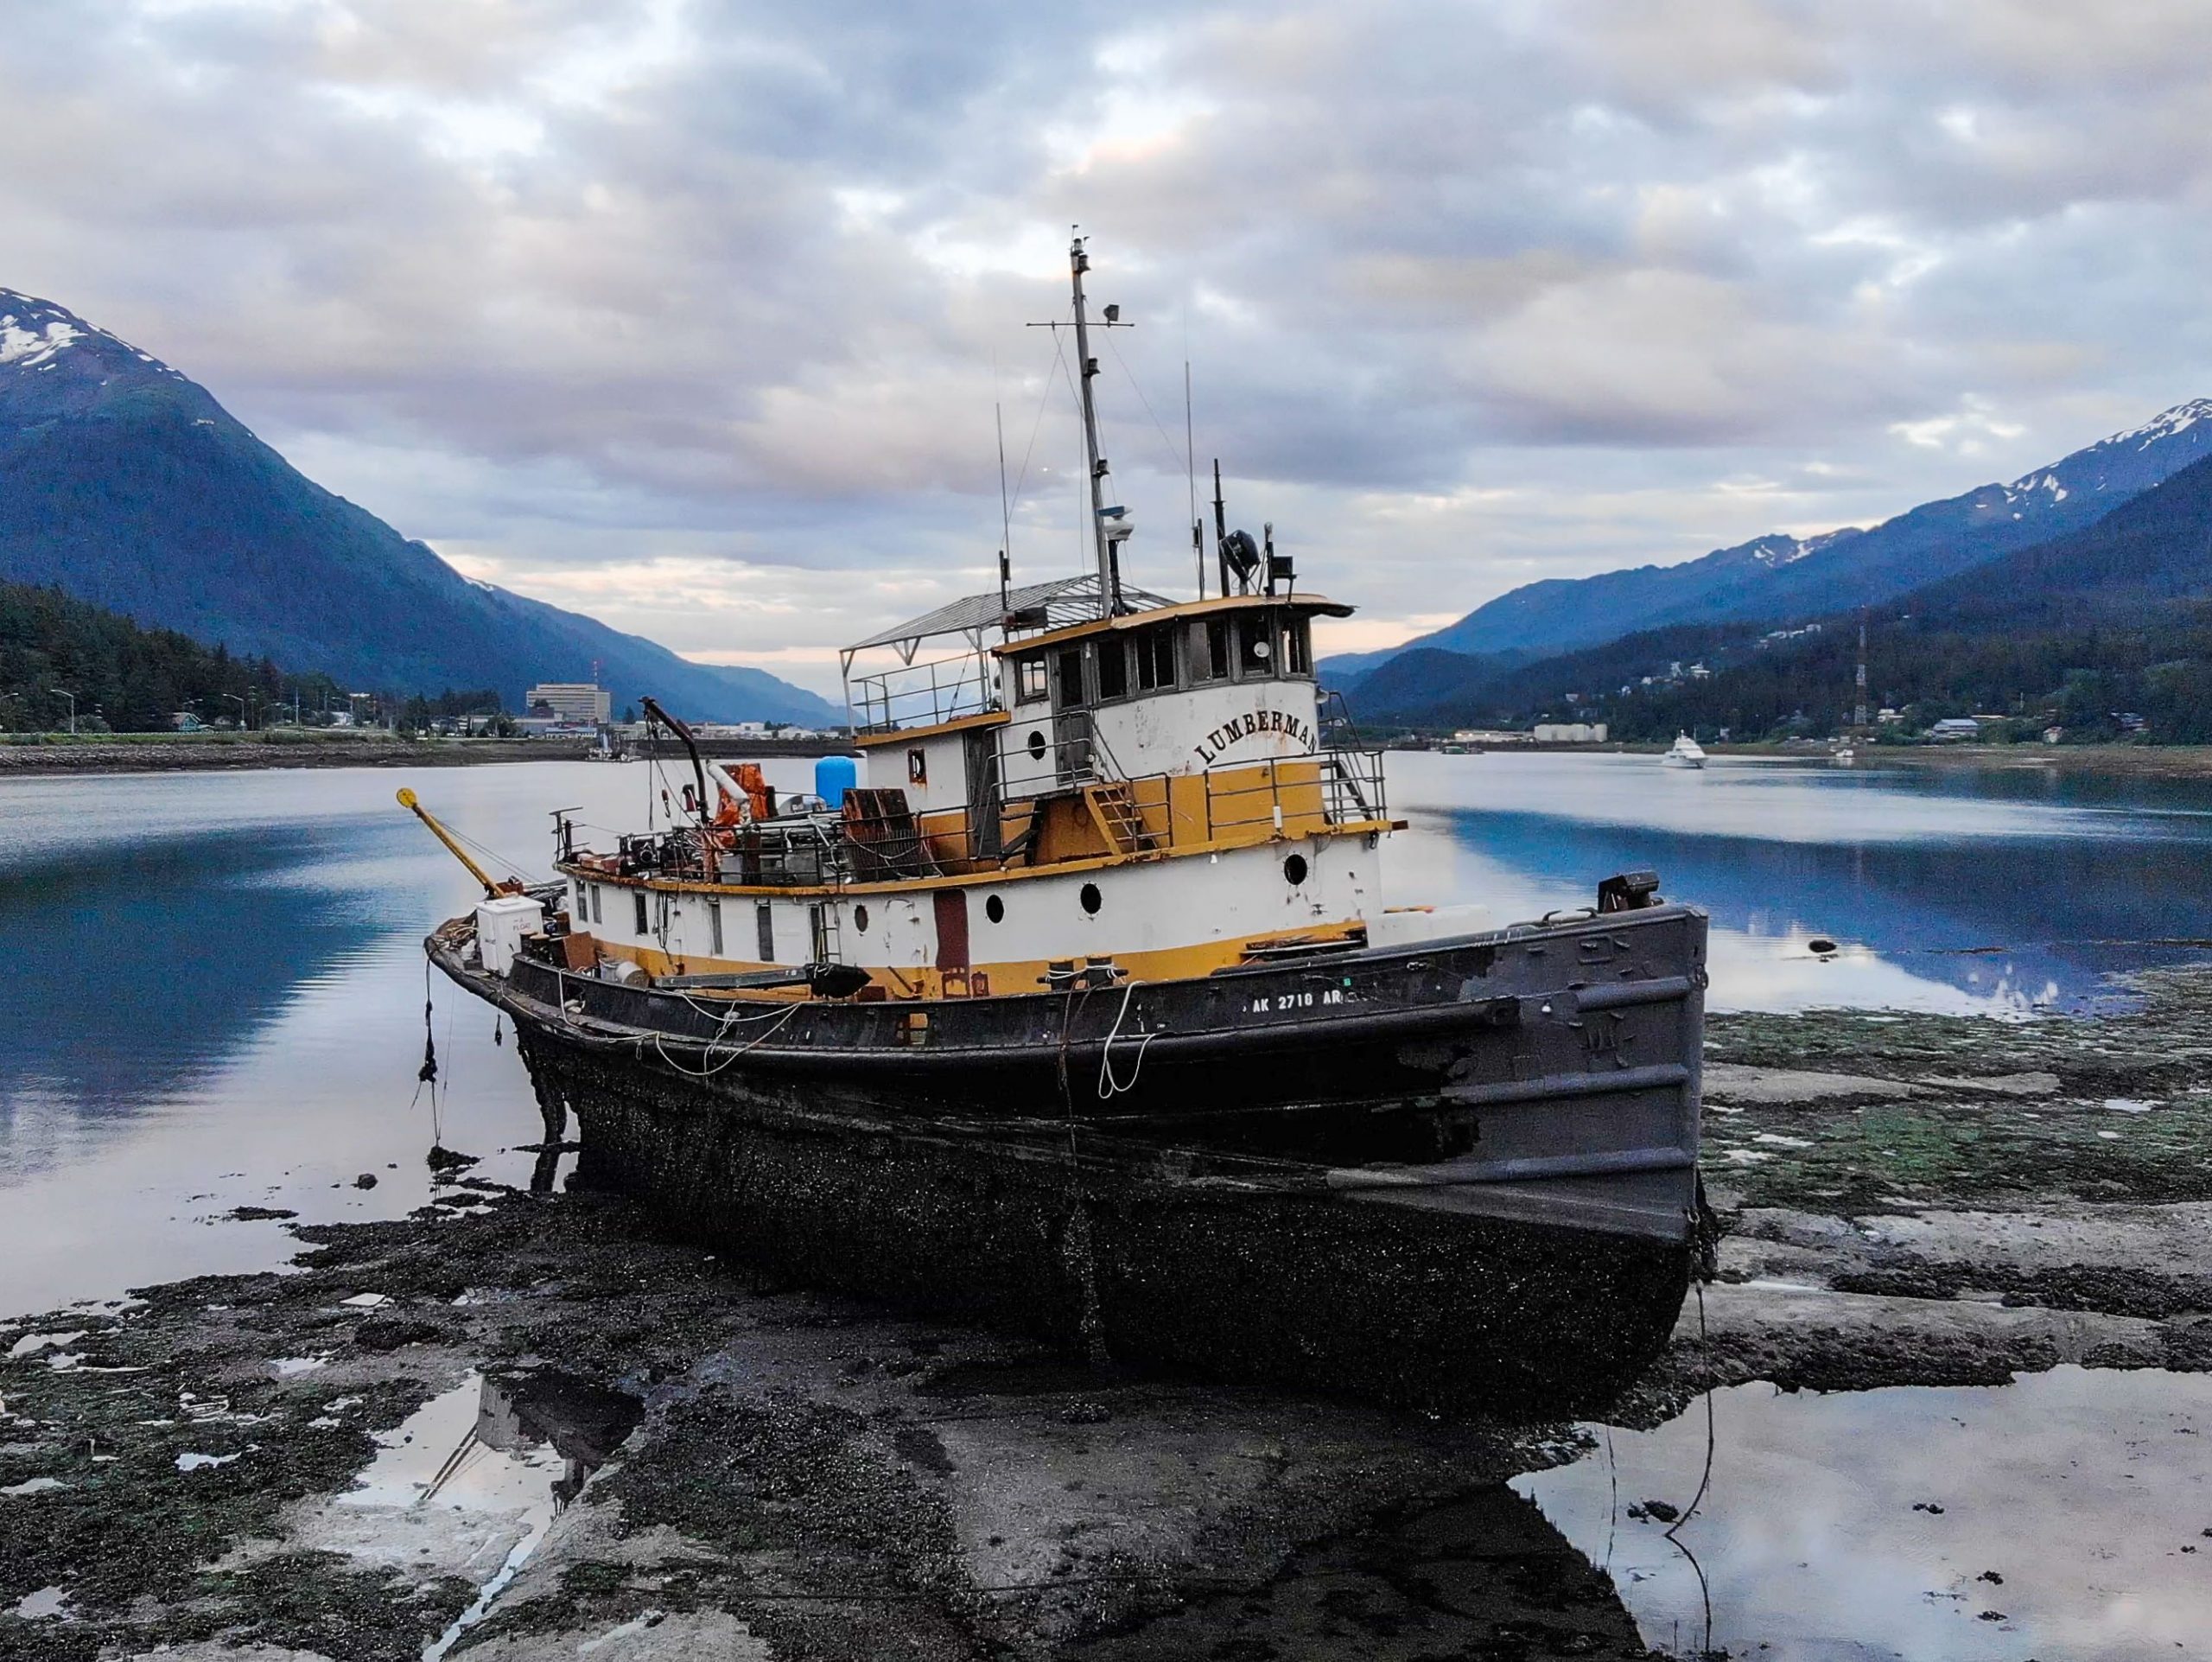 A weathered greyissh tugboat on the sandy beach with mountains in the background